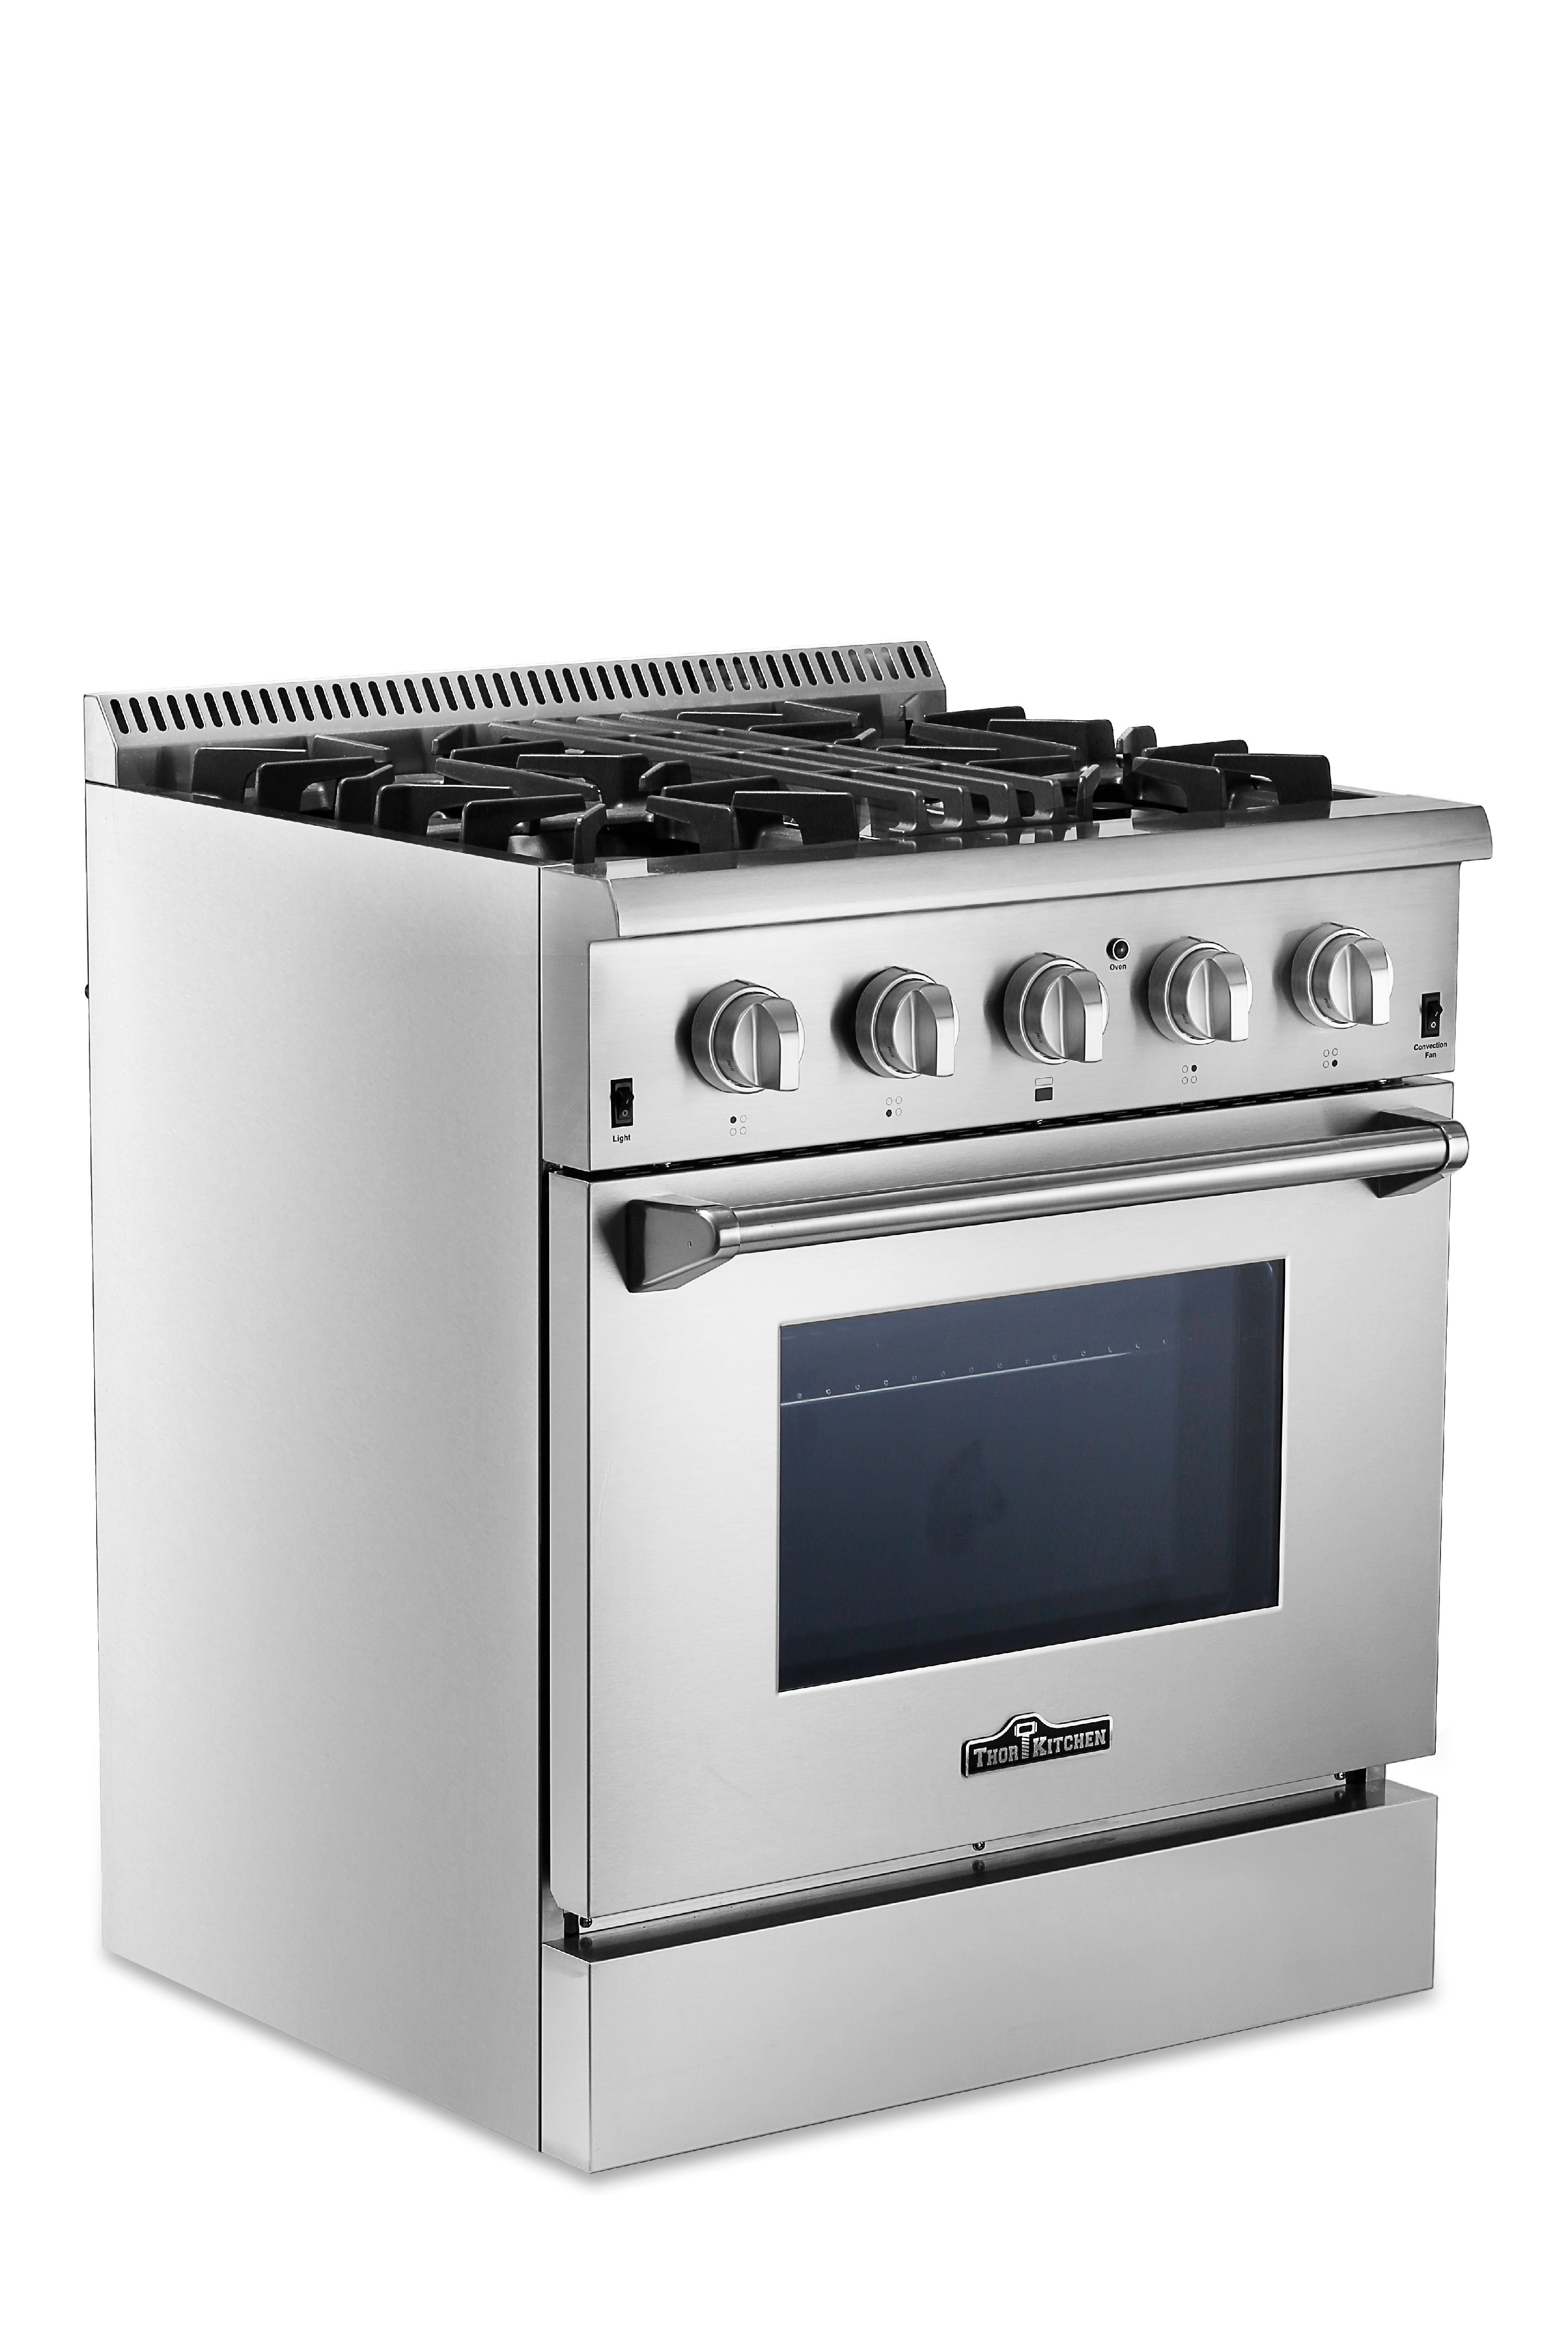 Thor Kitchen 30" Professional Free Standing Dual Fuel Range, Stainless Steel - image 2 of 6